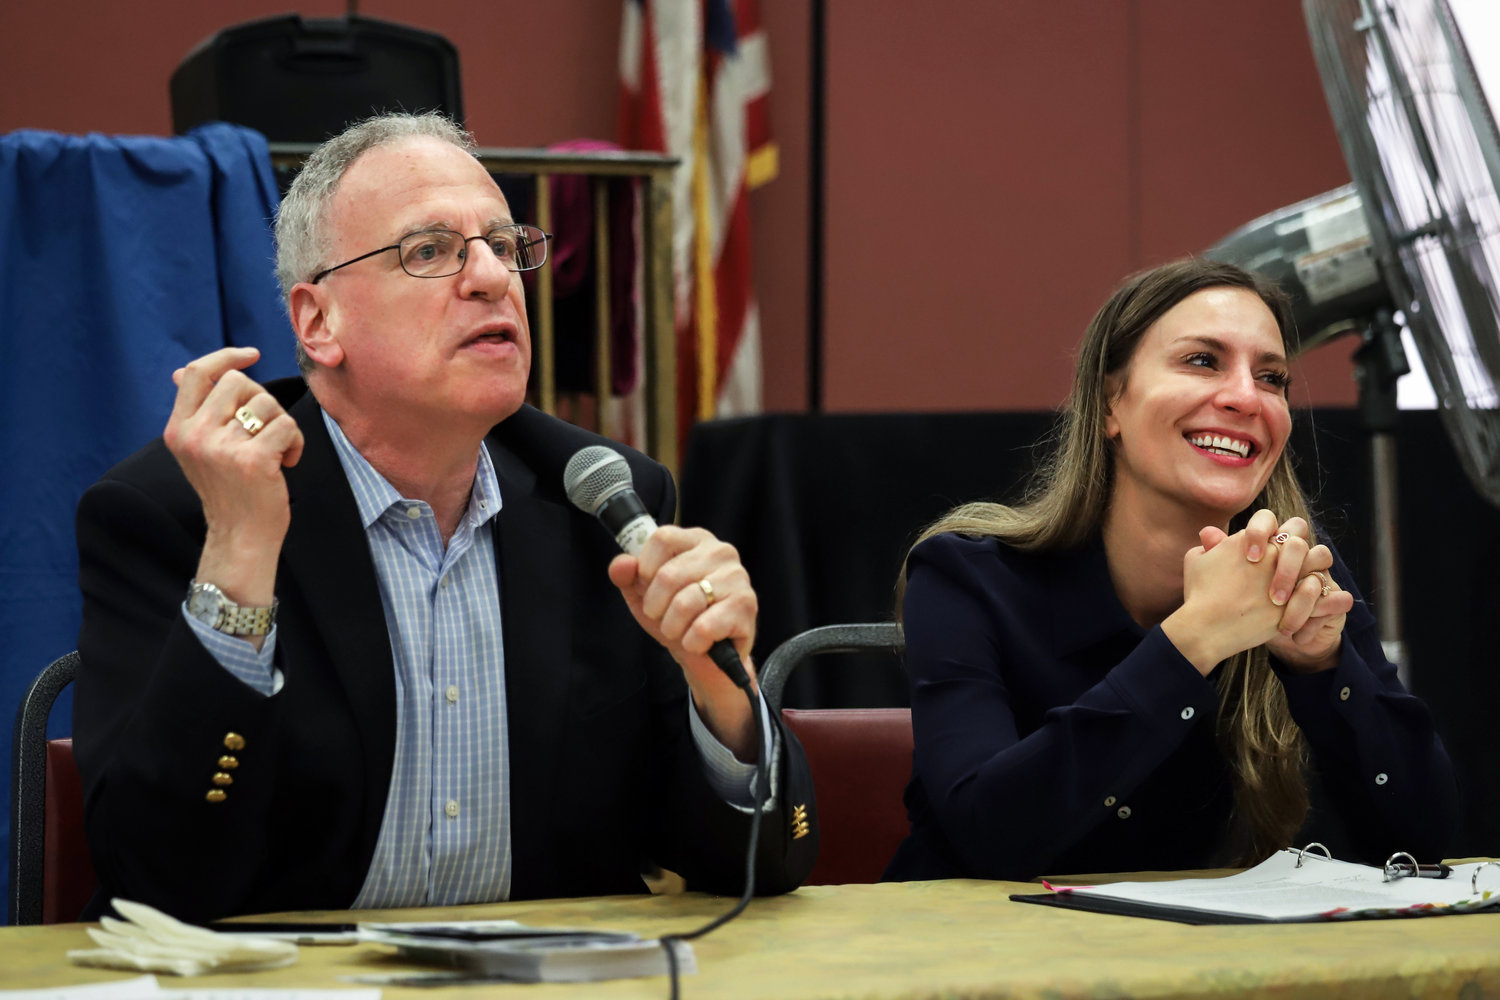 A specialized high school graduate himself, Assemblyman Jeffrey Dinowitz doesn’t think repealing the Hecht-Calandra Act — which established the controversial specialized high school admissions test standard 50 years ago — is the best move for the city’s next mayor. However, he does see some issues with the SHSAT process, especially where offers to Black and Latino students are concerned.